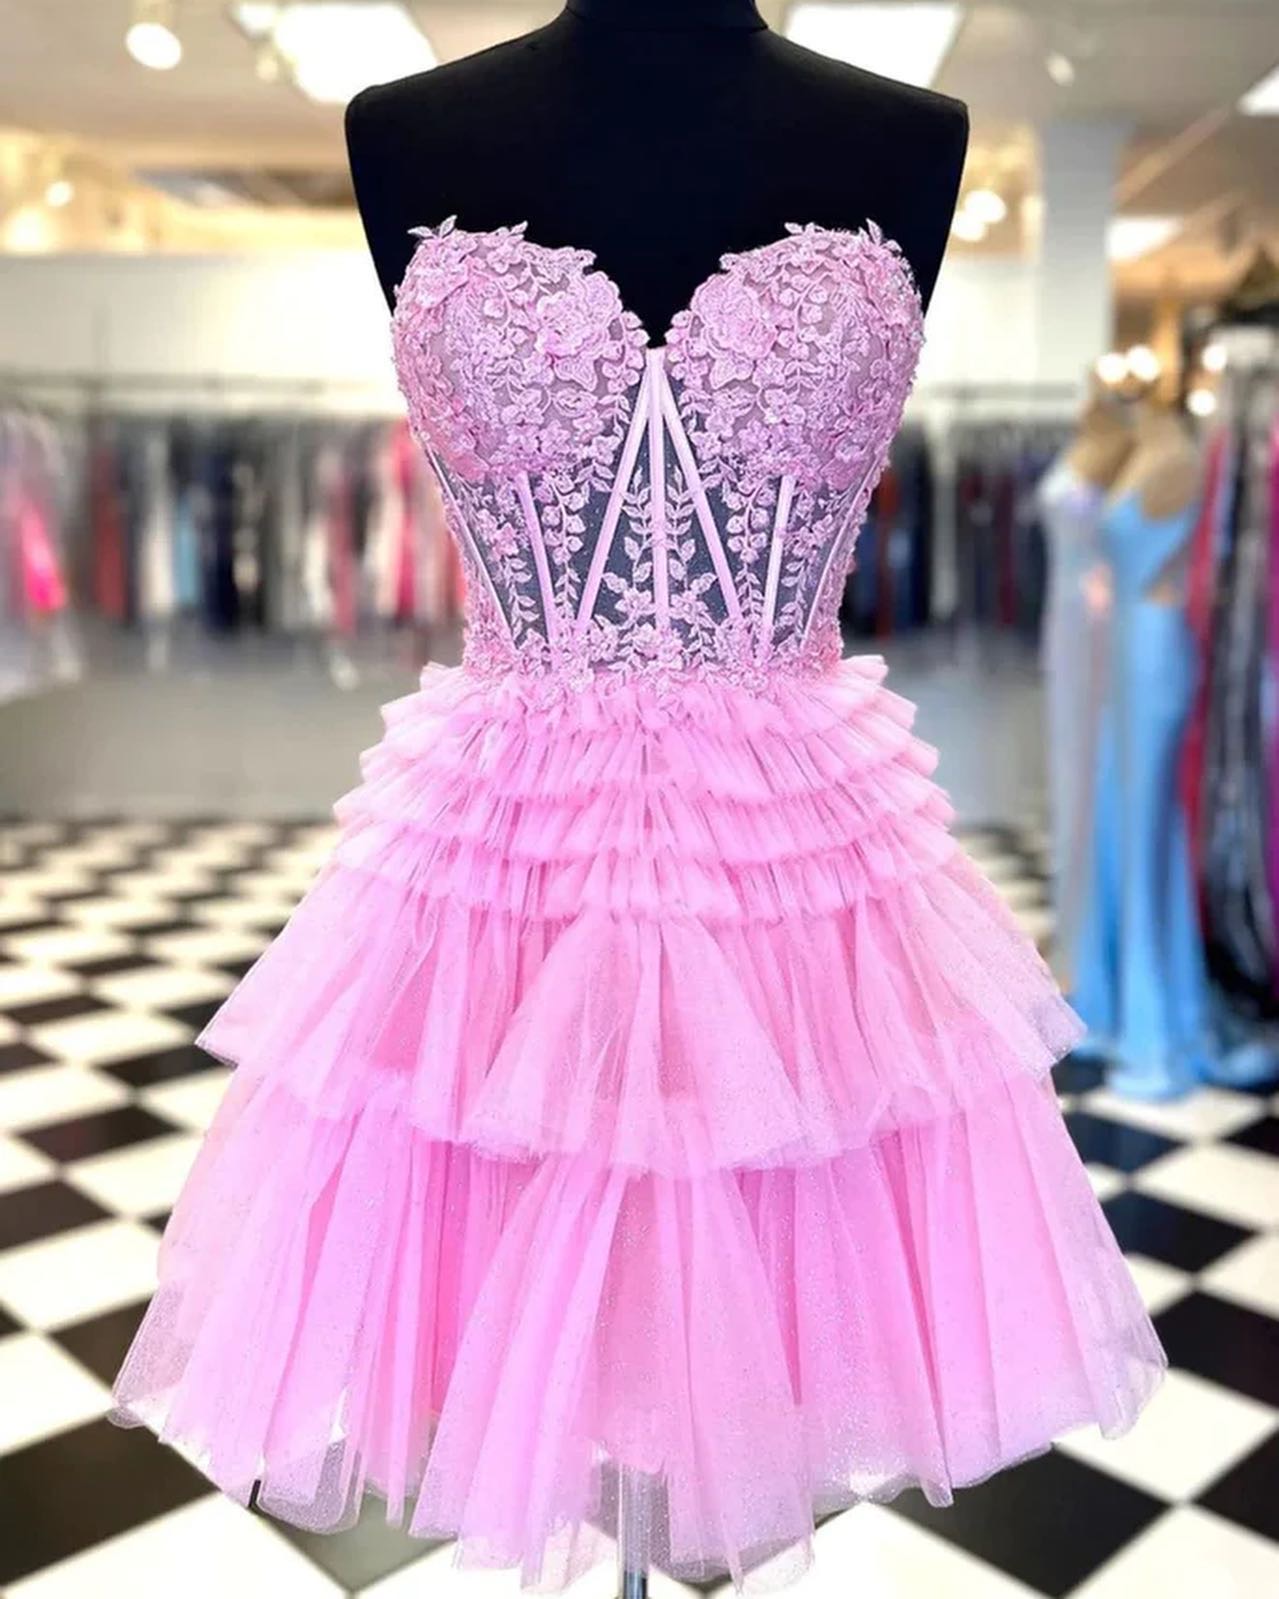 Short Lace Appliques Homecoming Dresses Illusion Corset Sweetheart Cocktail Dresses Pink Tiered Tulle Graduation Dresses Lace Mini Prom Dresses